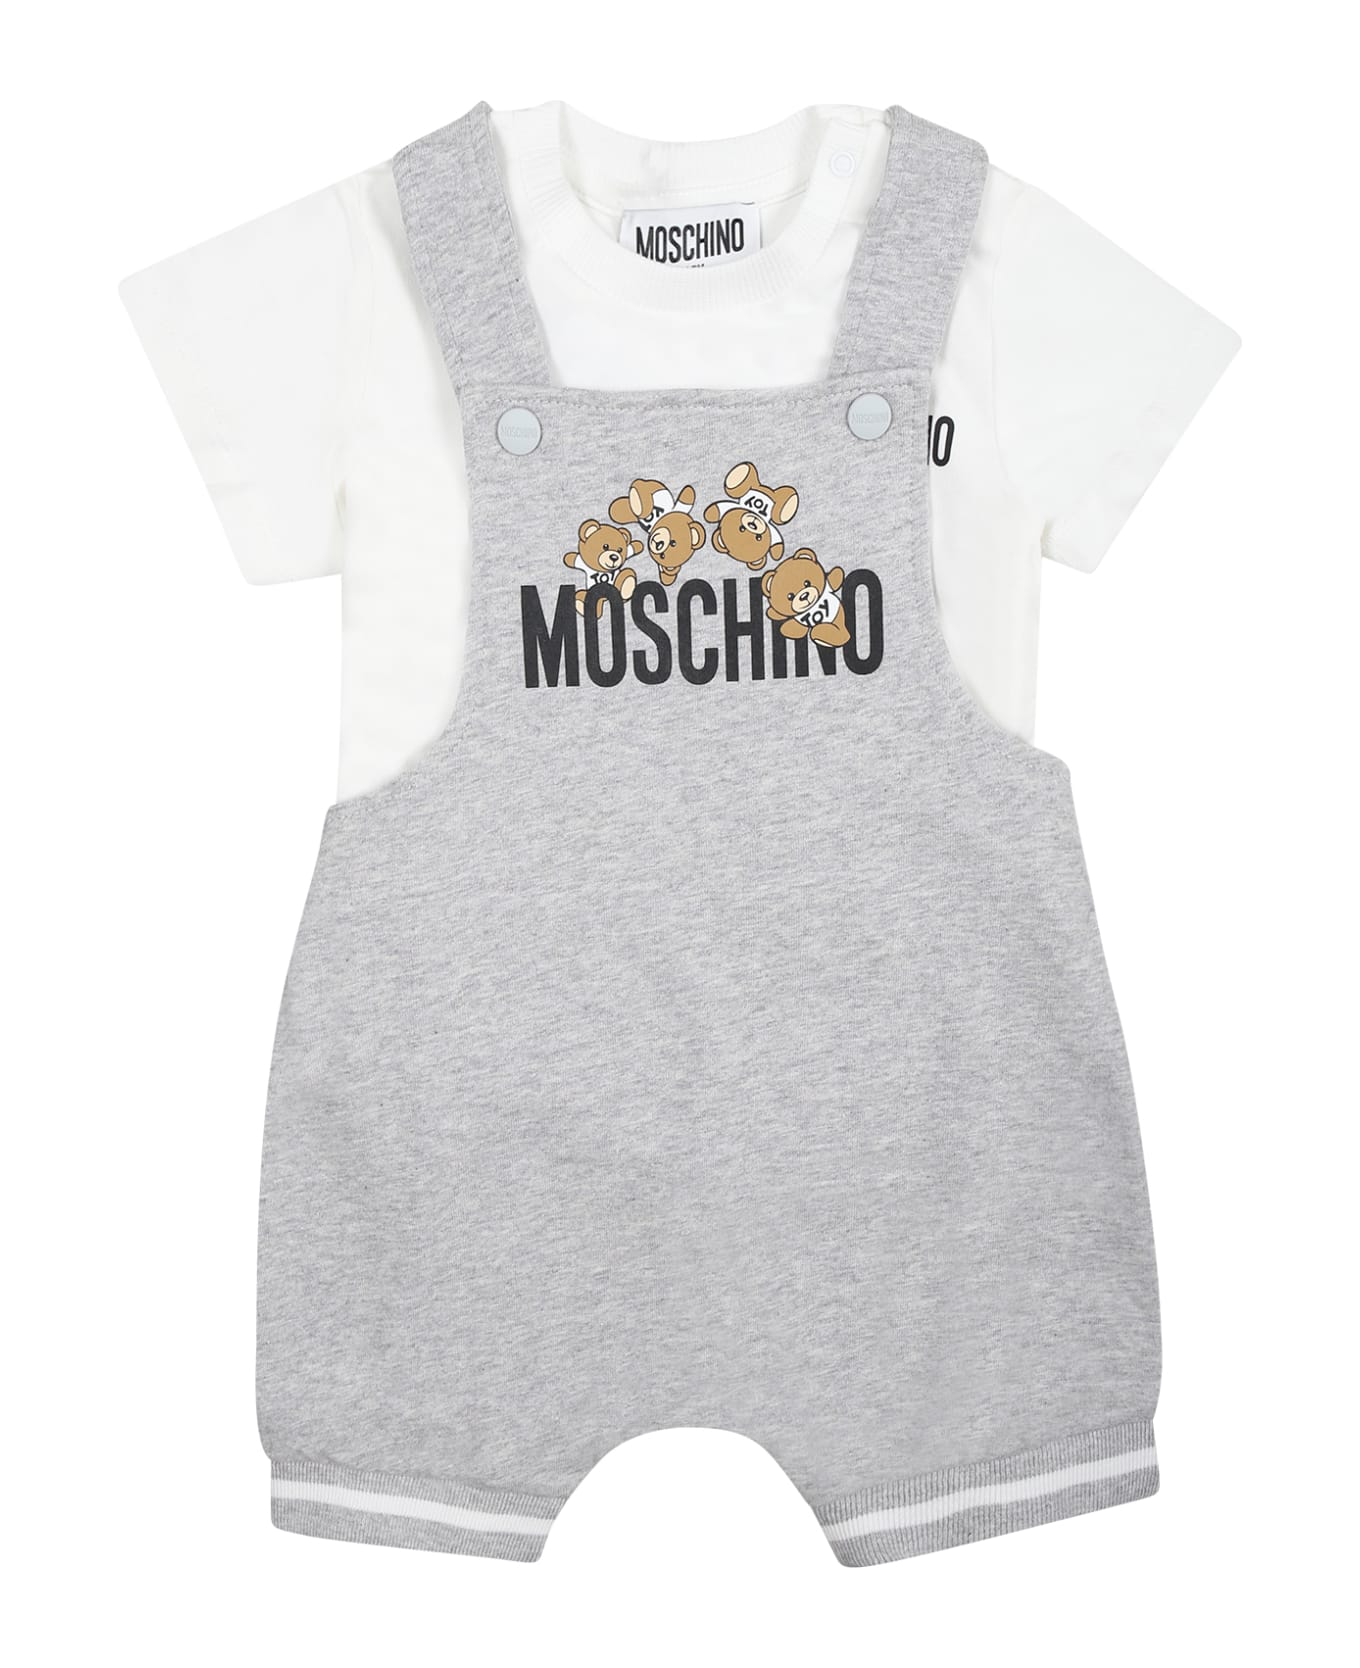 Moschino Gray Dungarees For Baby Boy With Teddy Bear - Grey コート＆ジャケット